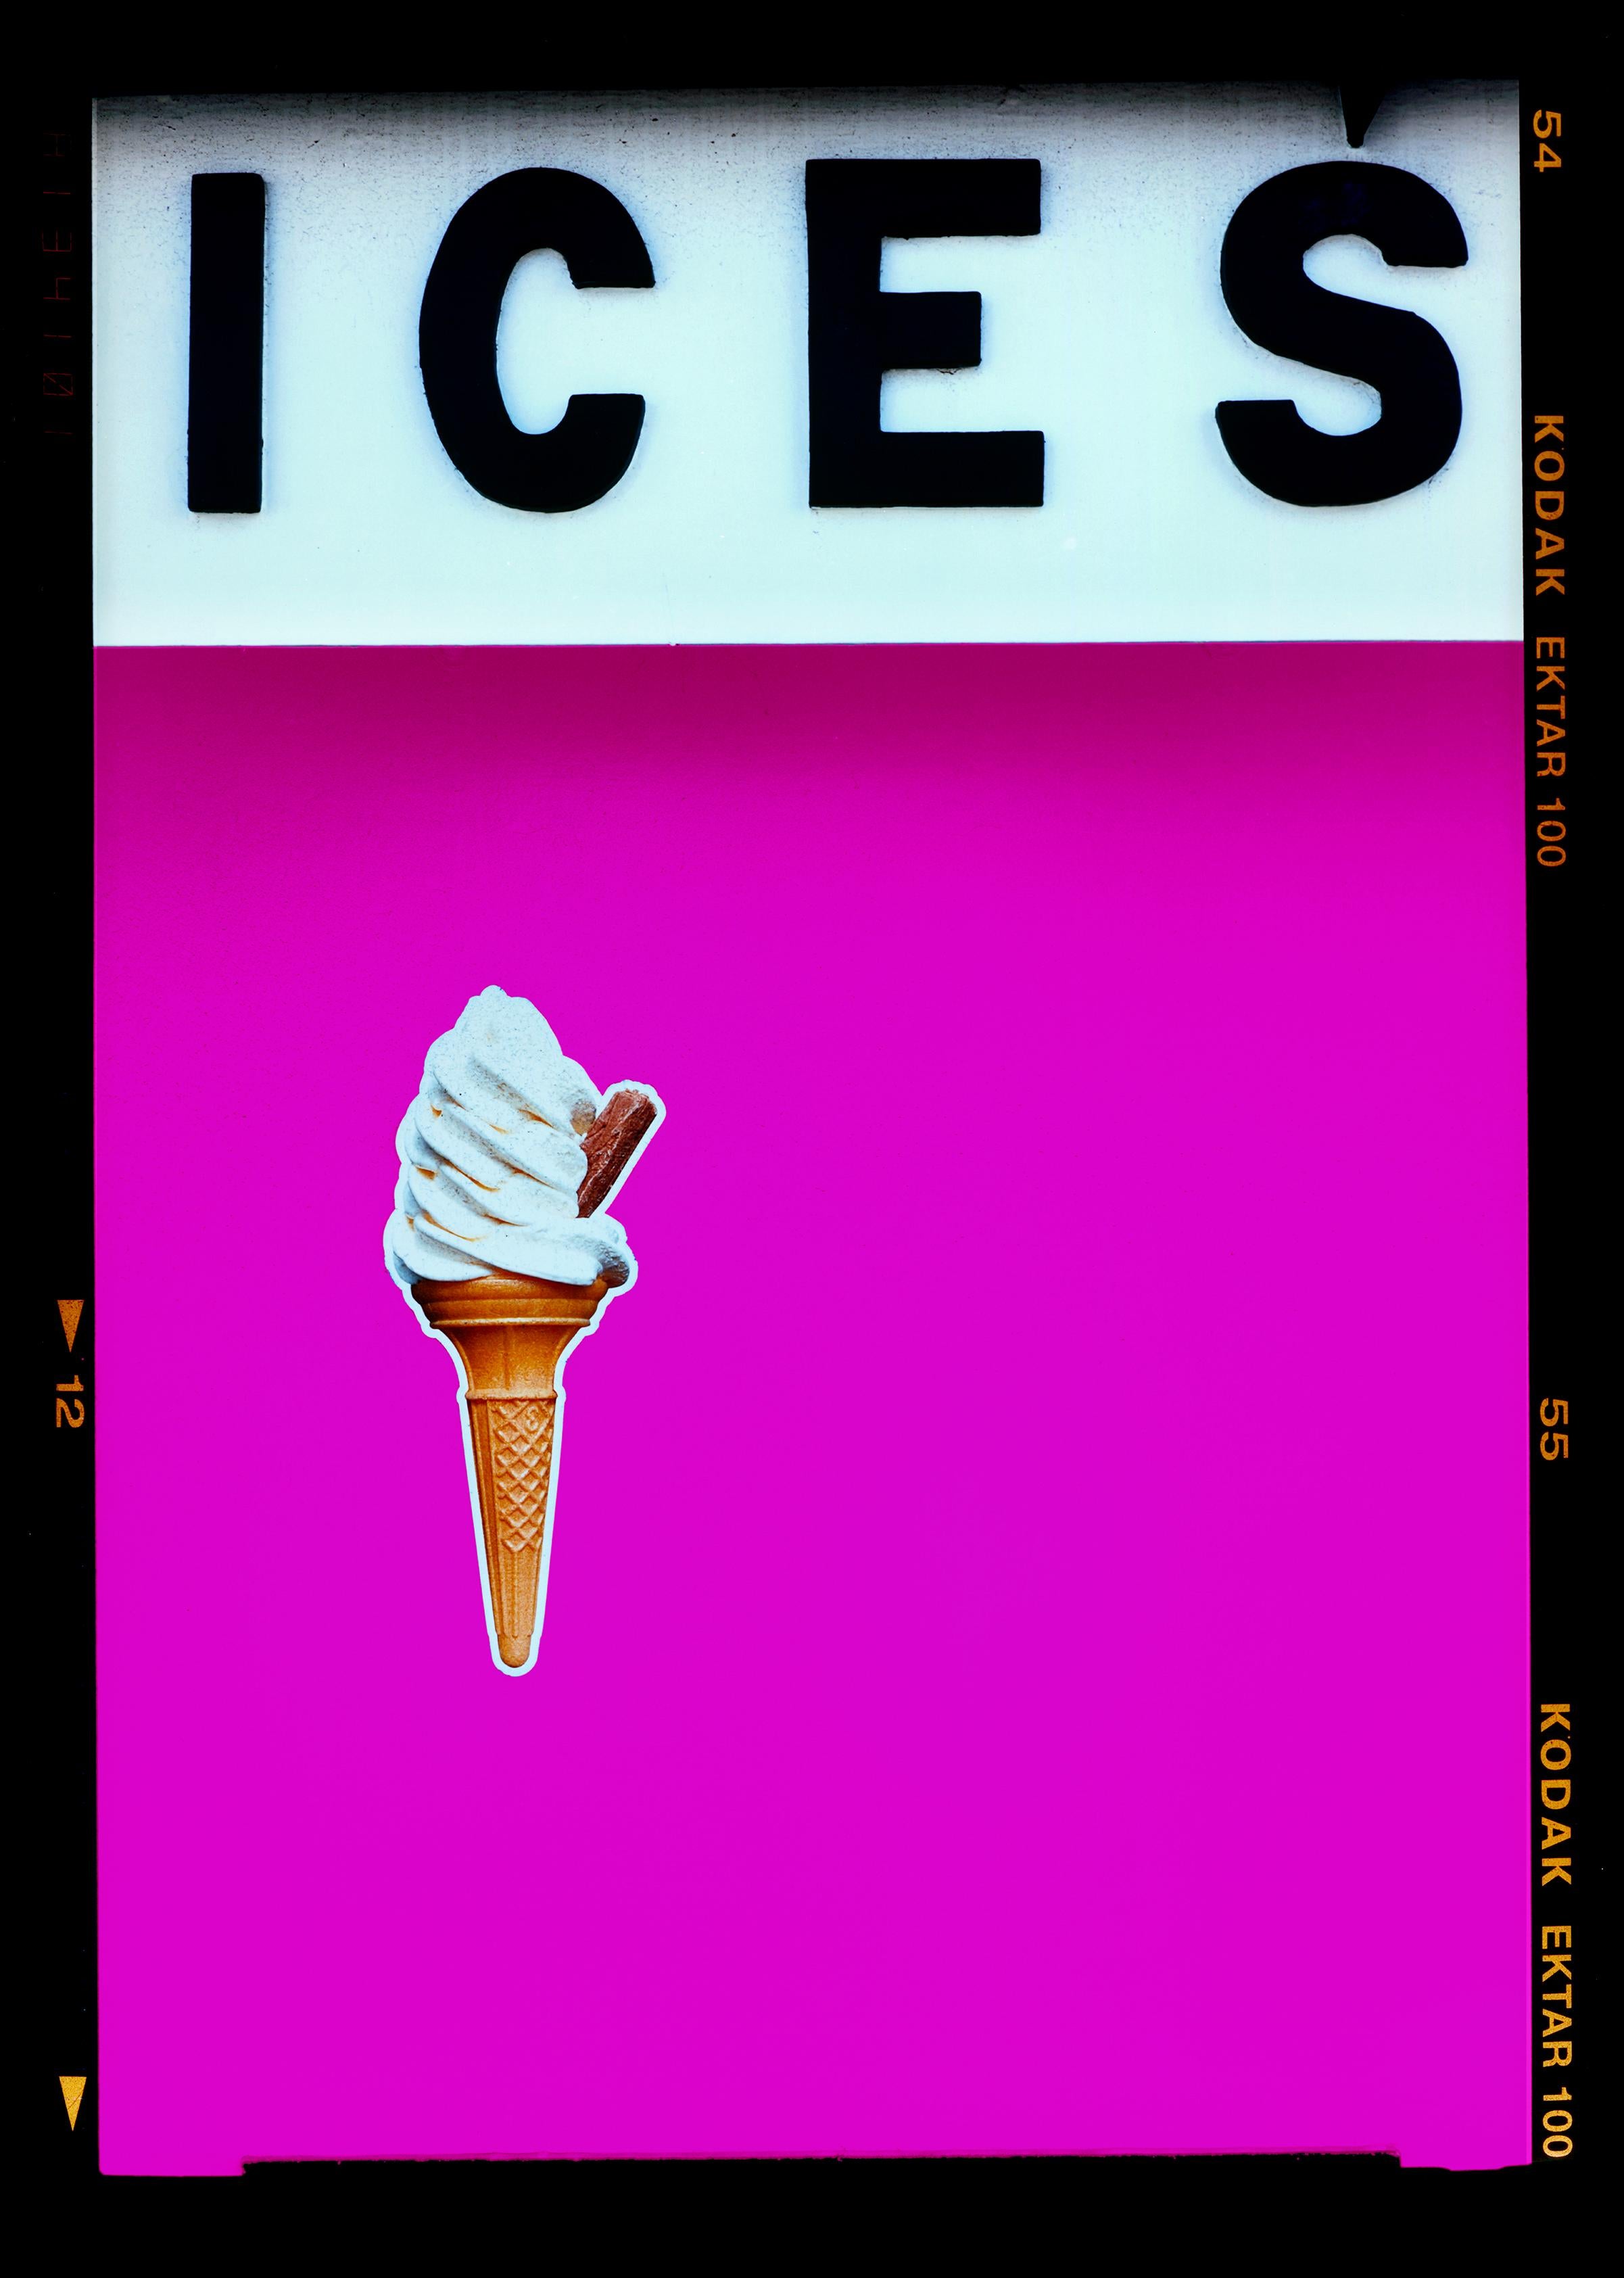 Richard Heeps Color Photograph - Ices (Pink), Bexhill-on-Sea - British seaside color photography